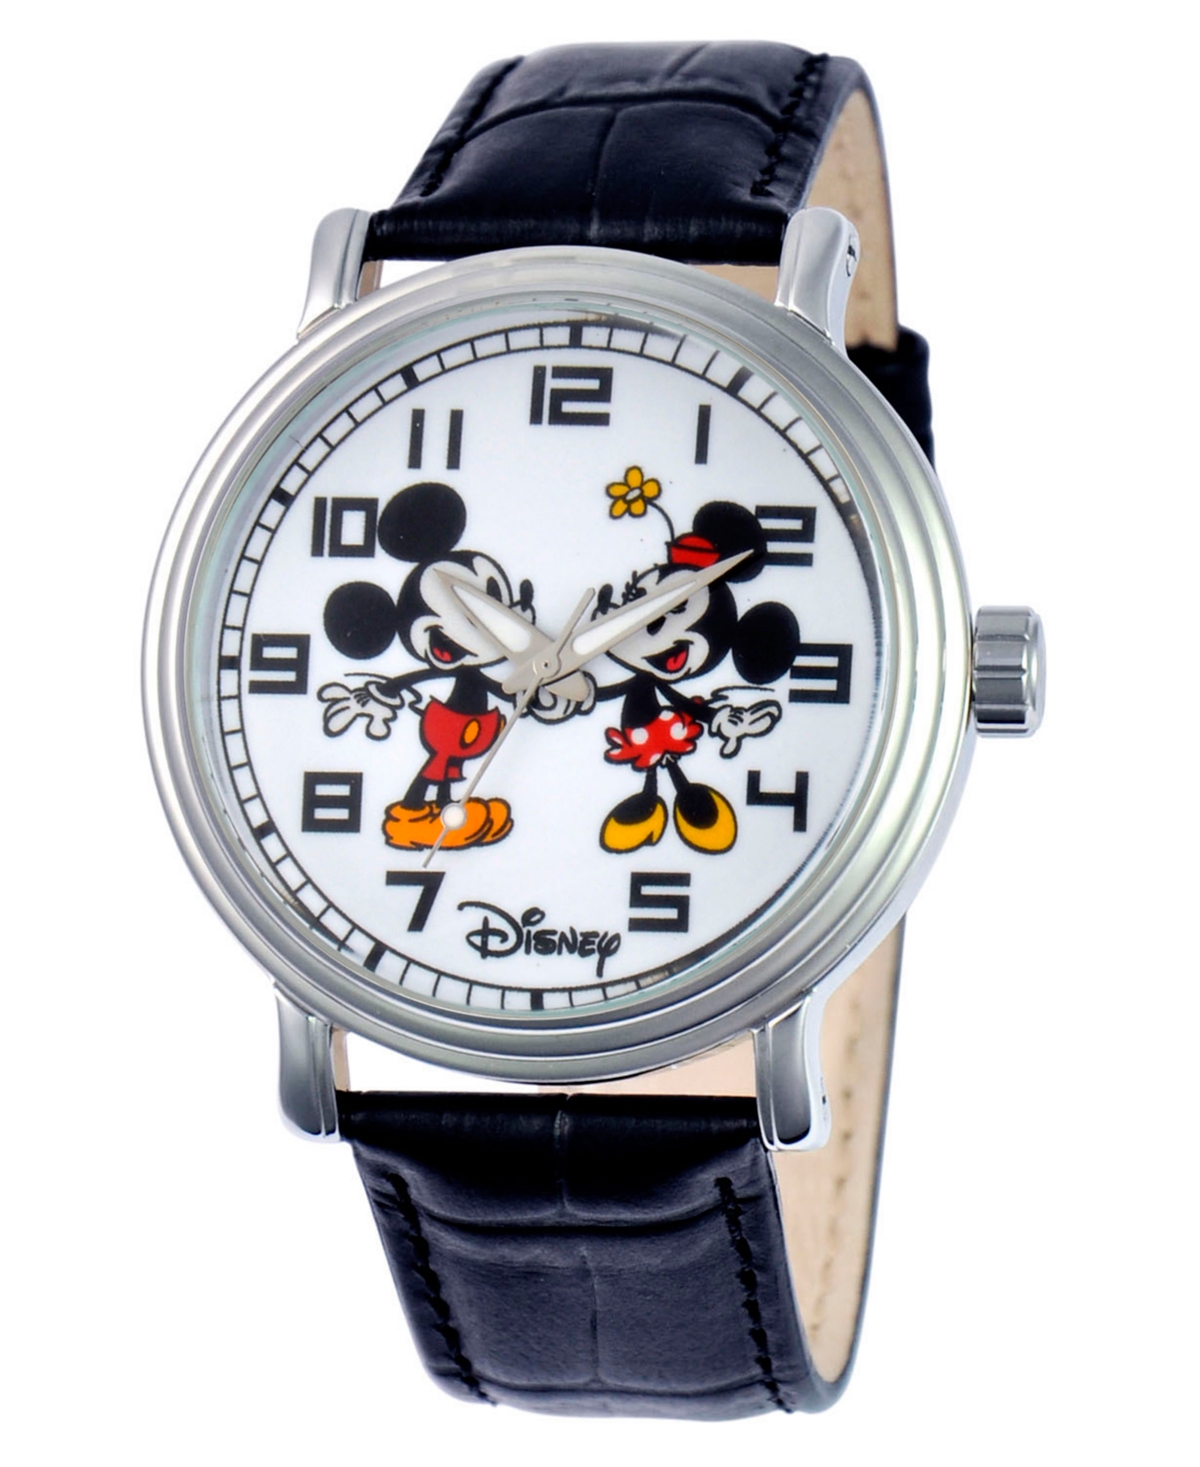 Disney Mickey and Minnie Mouse Men's Alloy Vintage Watch - Black